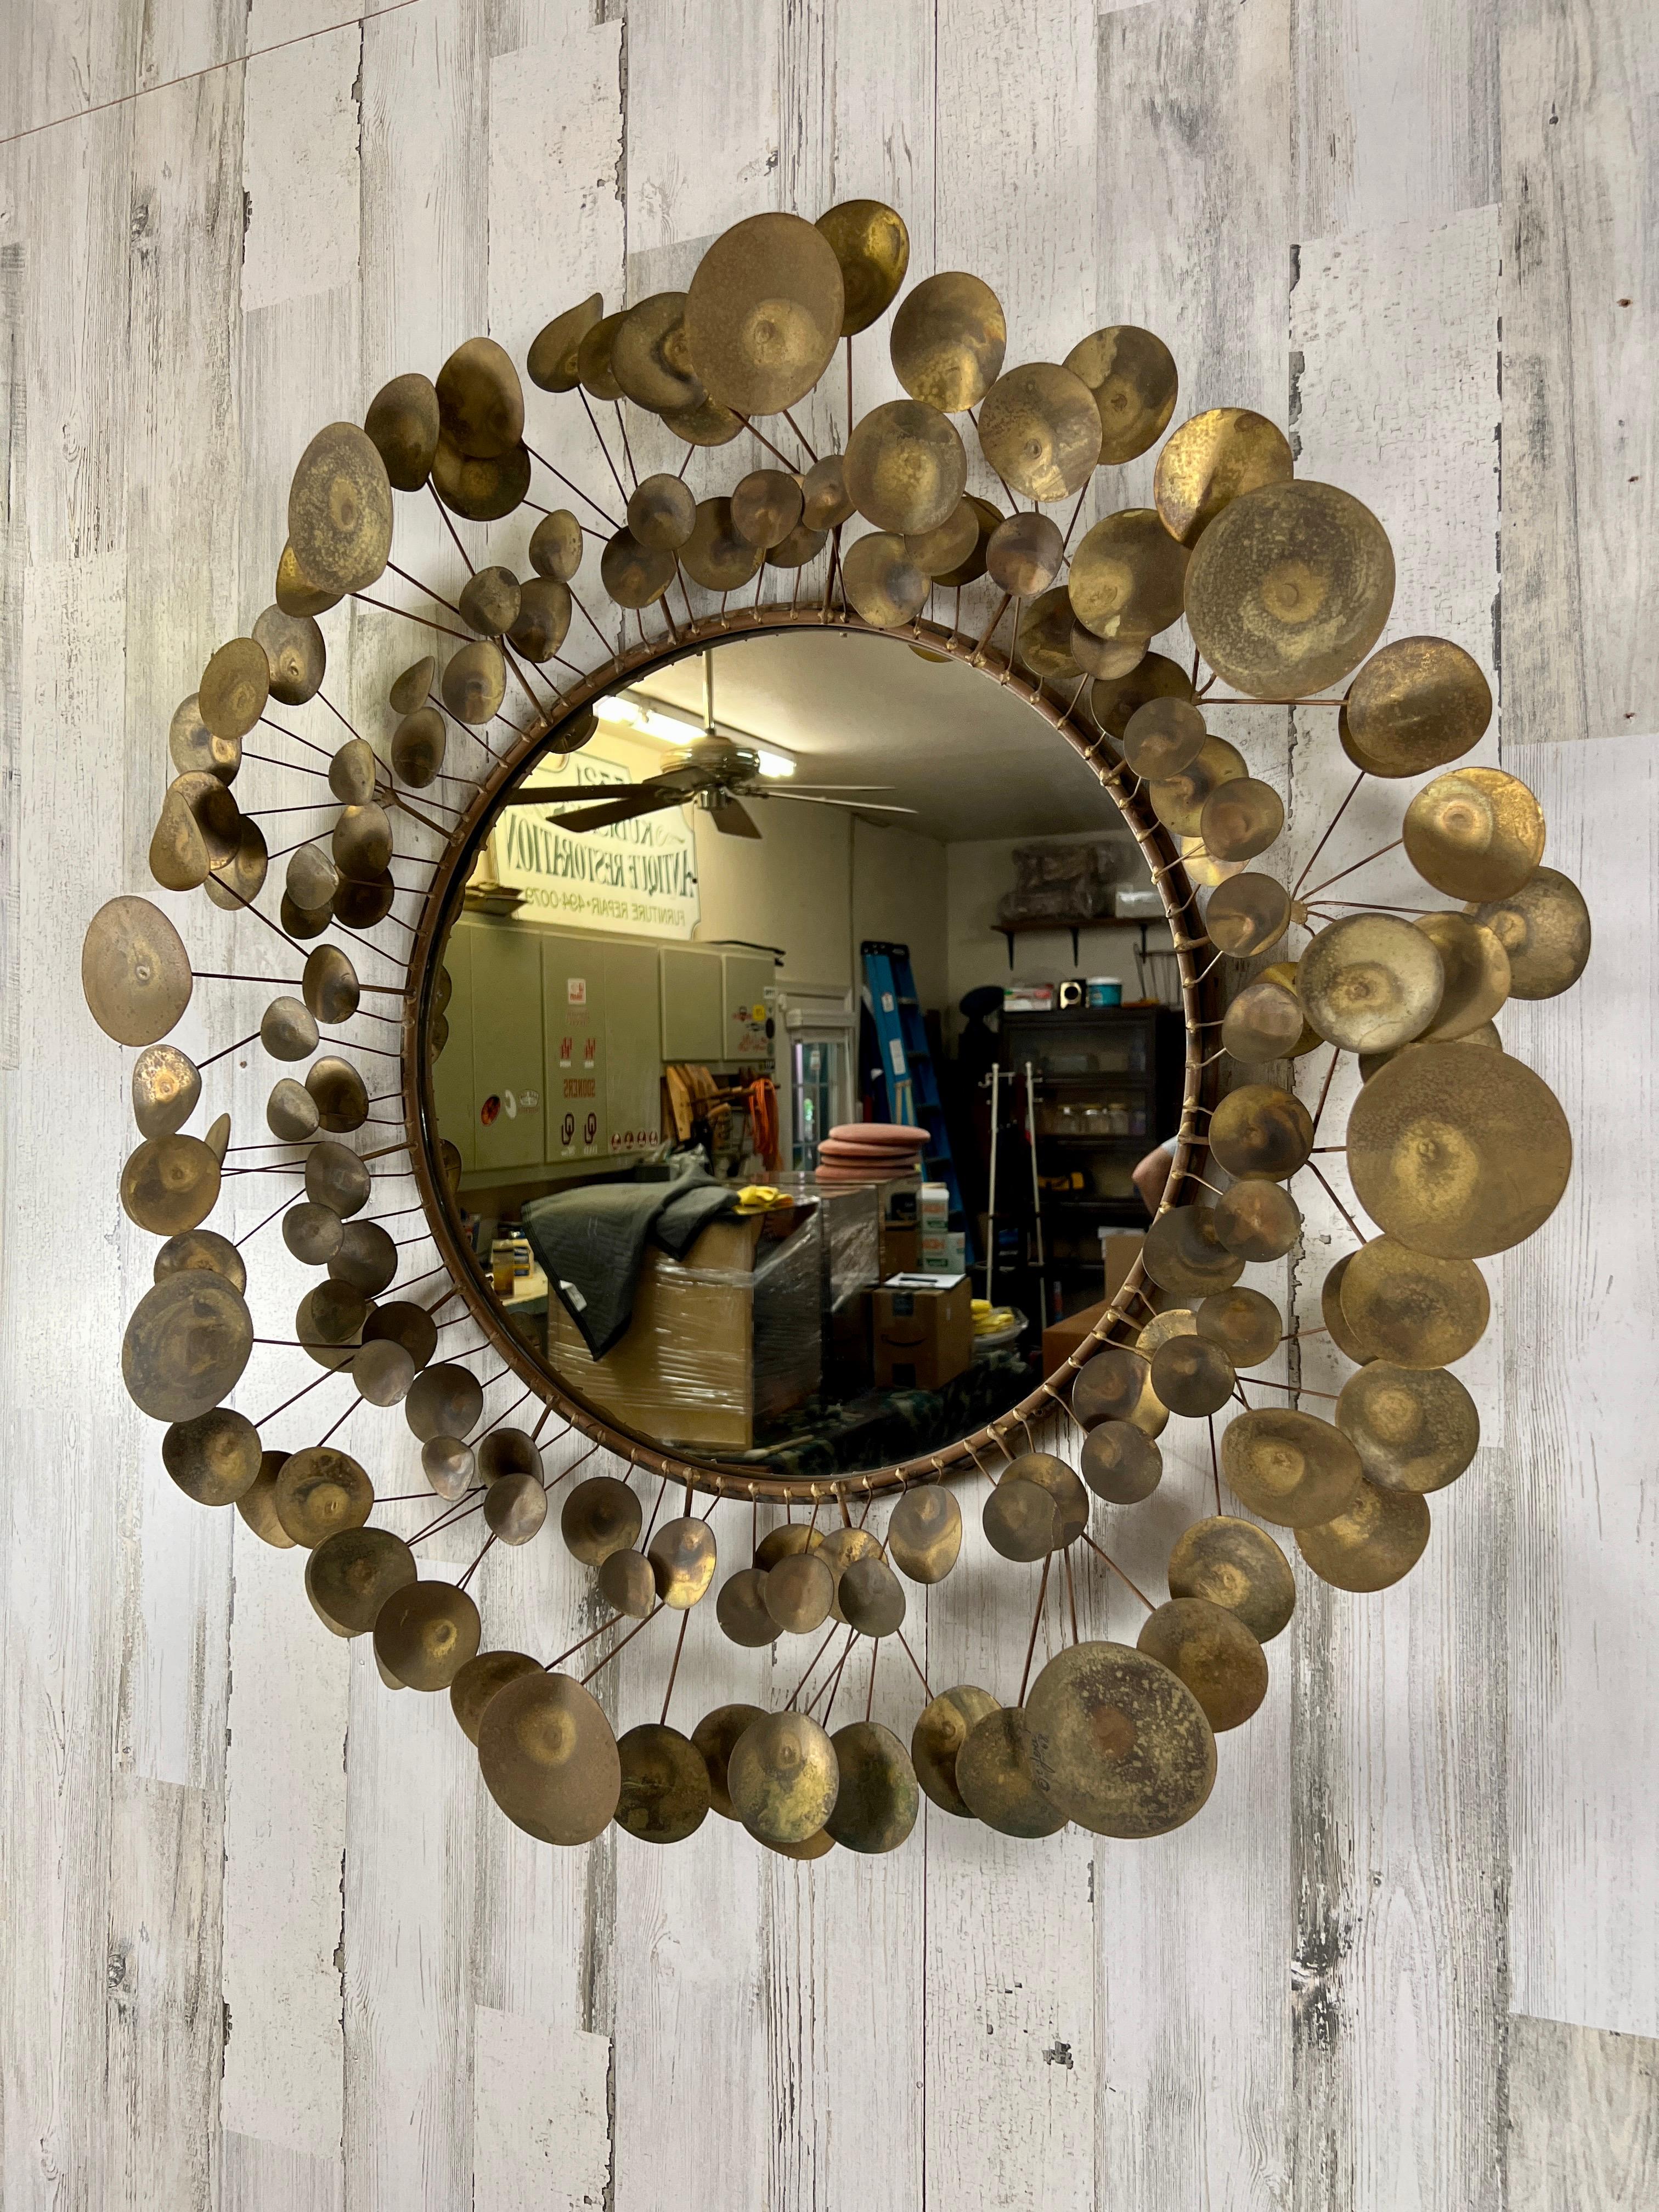 Early version of the Raindrops mirror with fifty years of natural patina. Signed 1968.